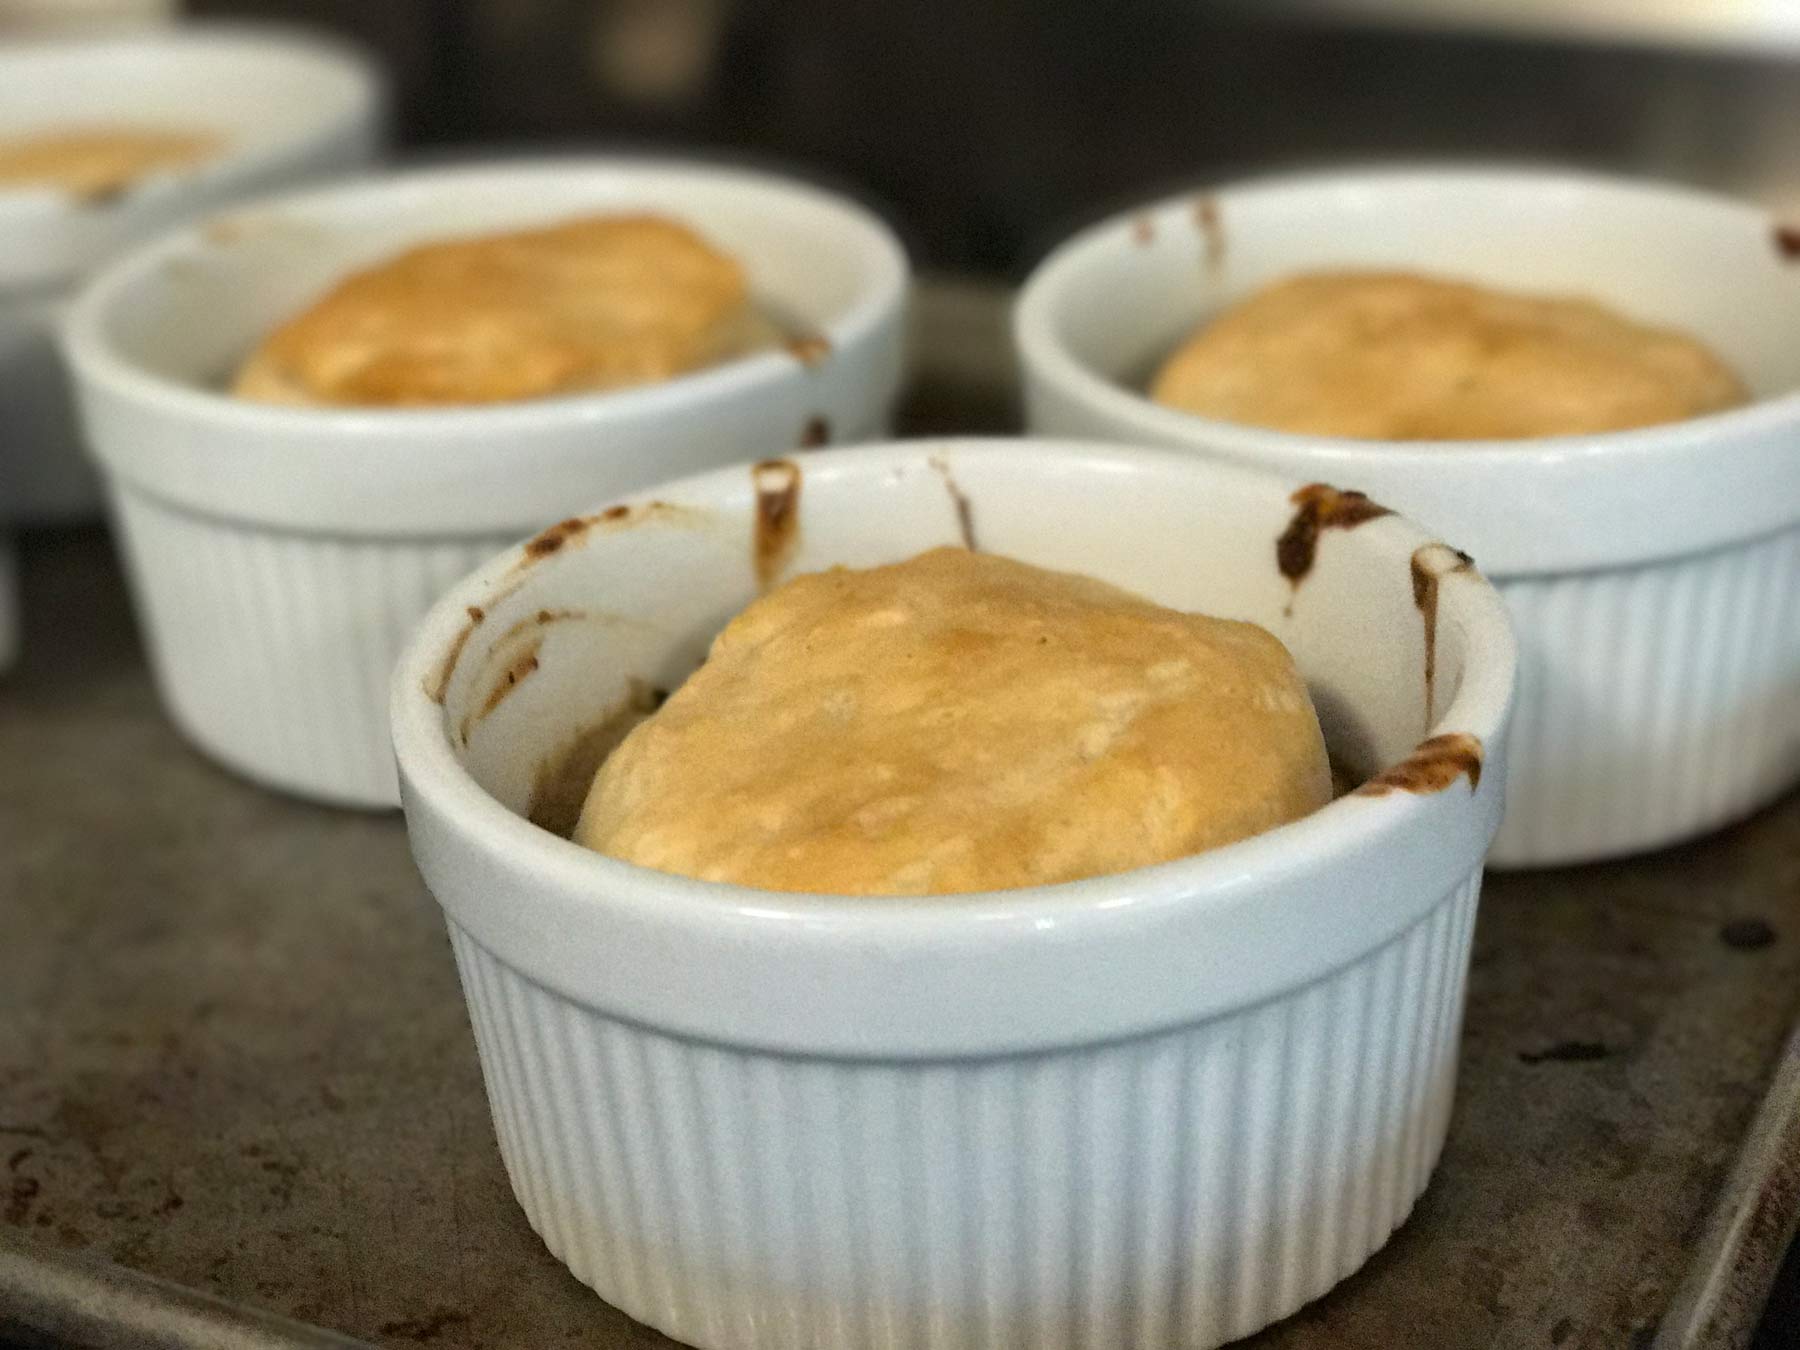 Chicken pot pies fresh out of the oven.